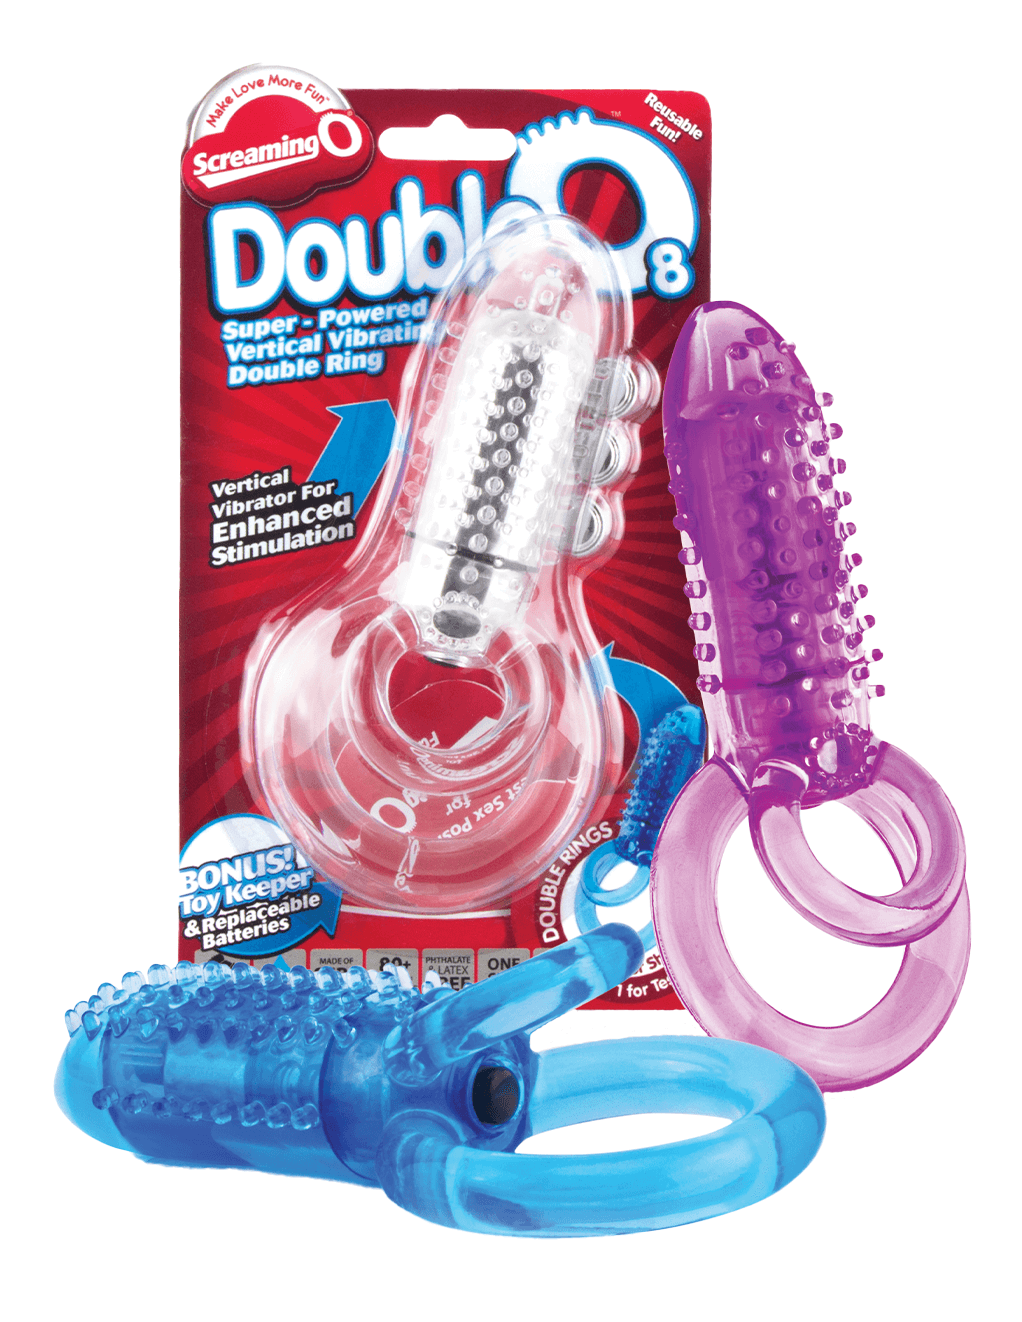 Screaming O Doube O 8 - Toys with Packaging